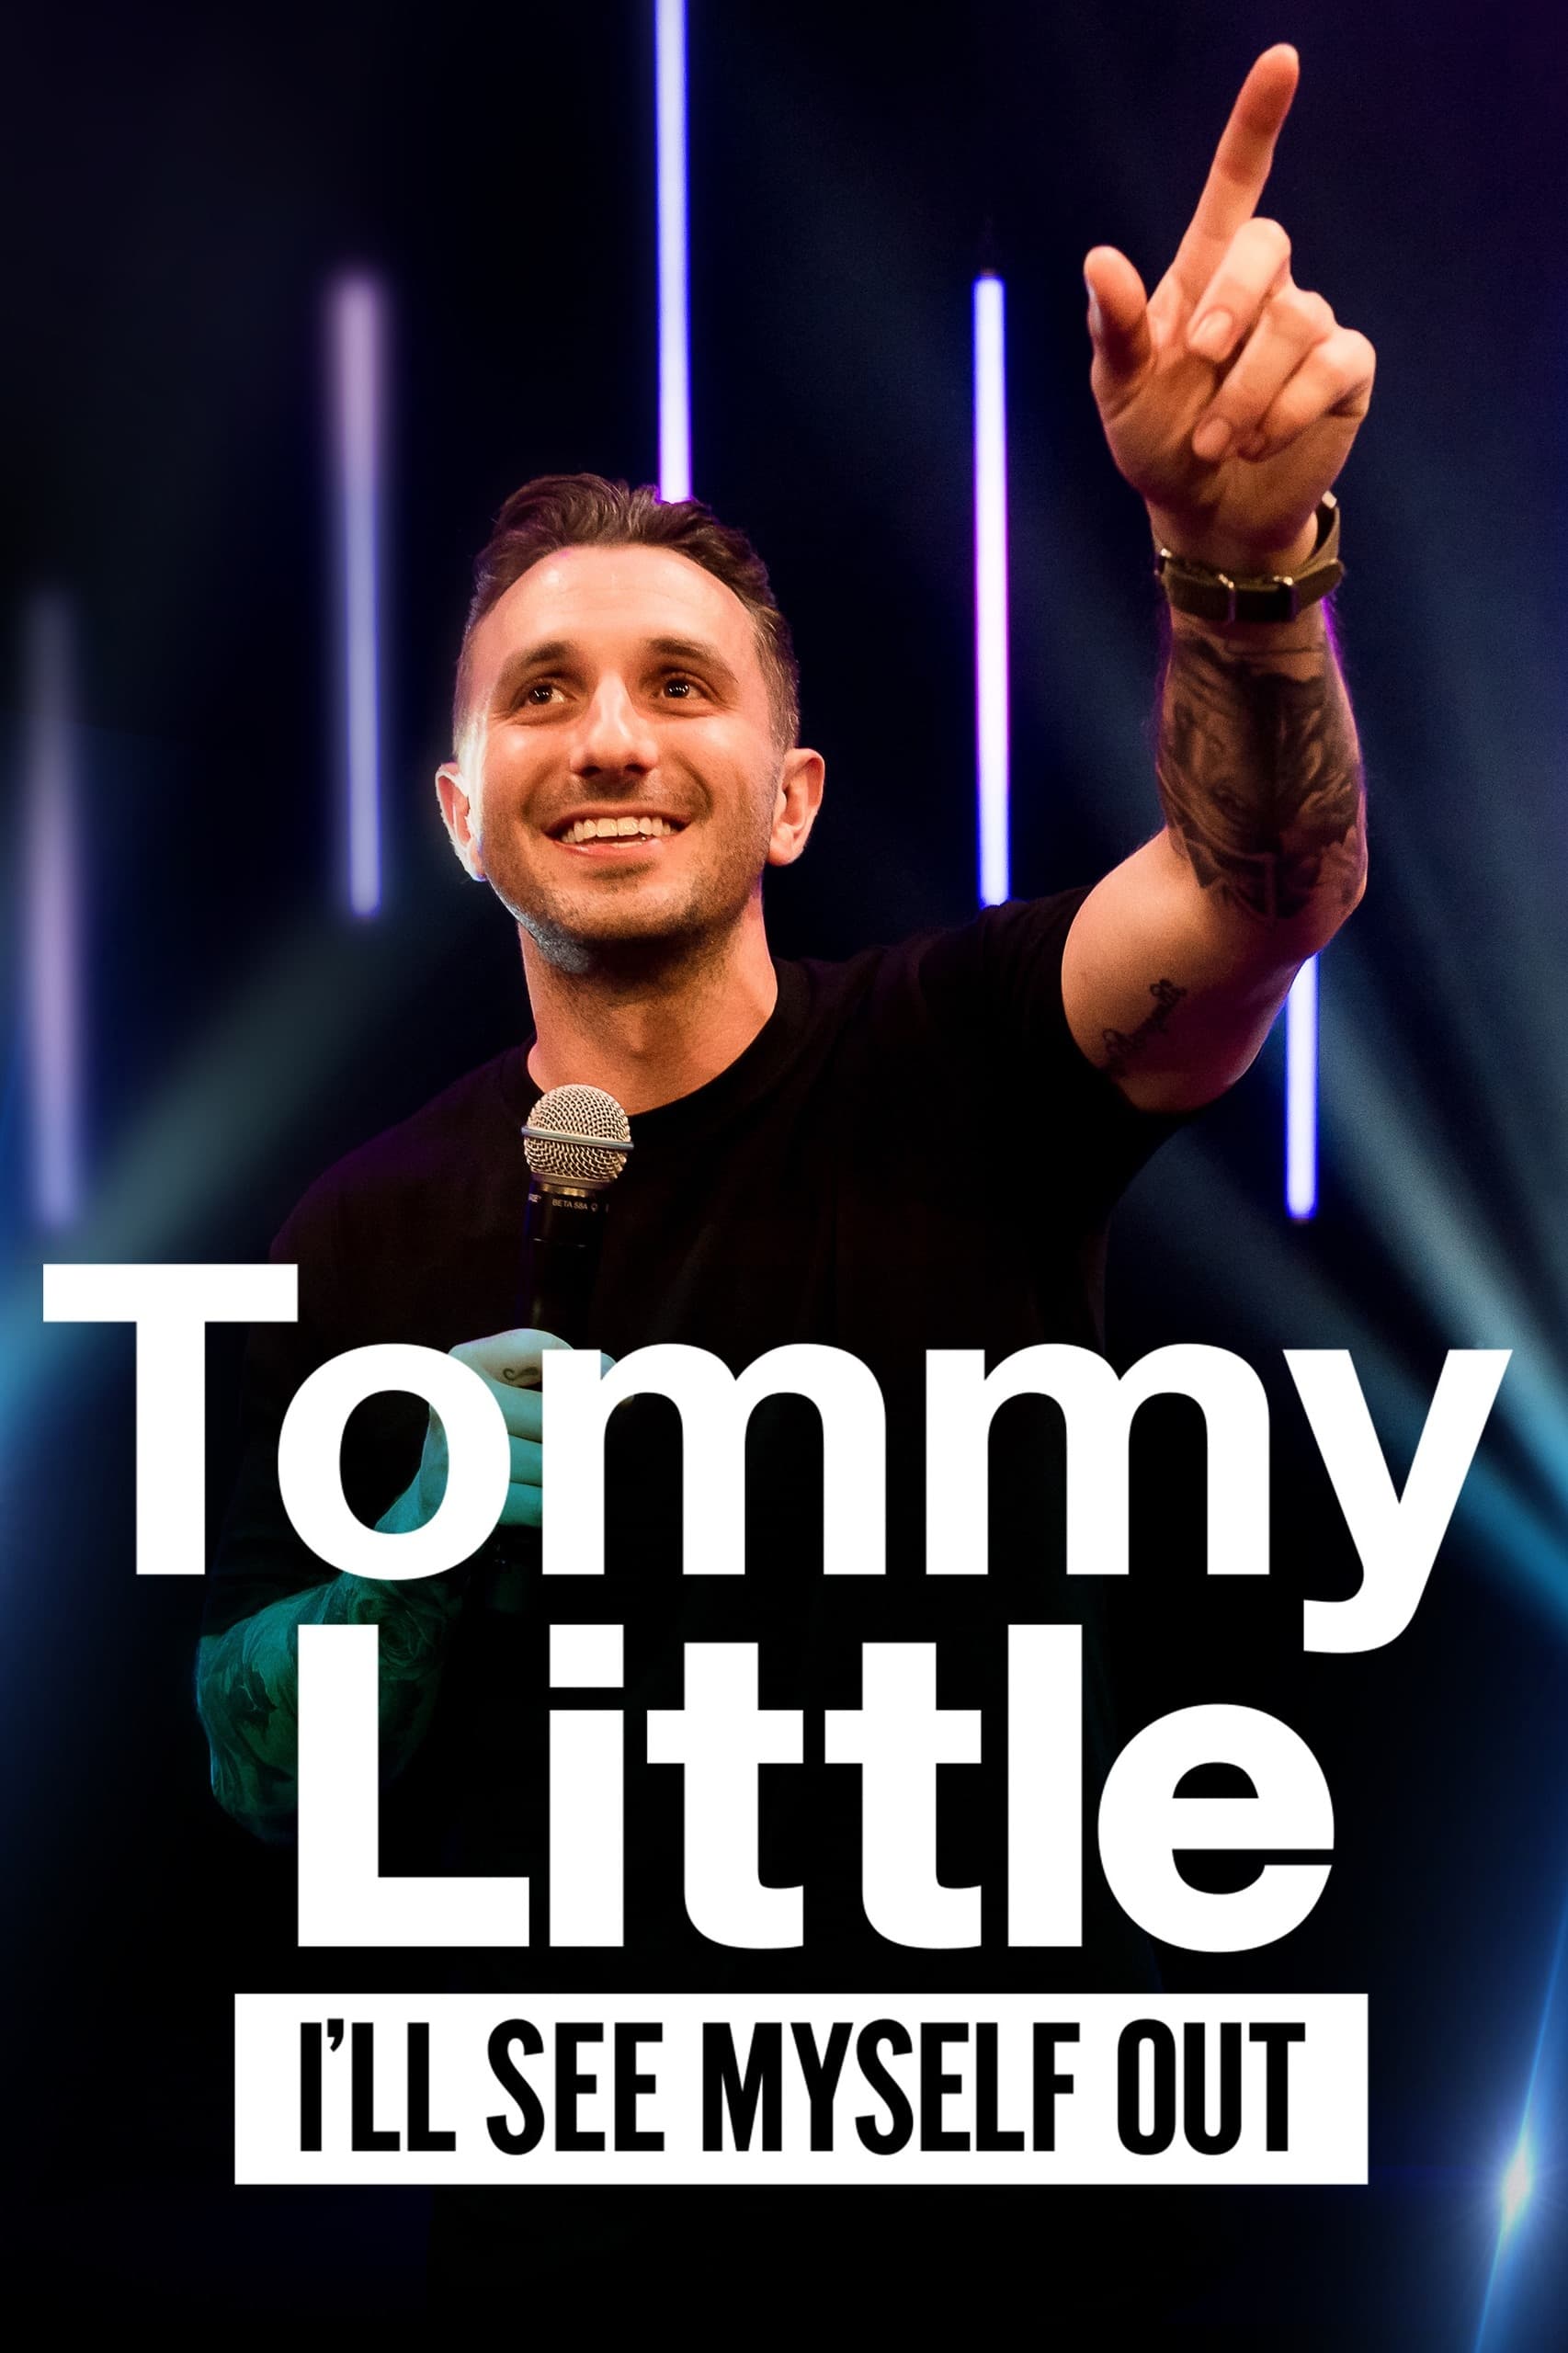 Tommy Little: I'll See Myself Out